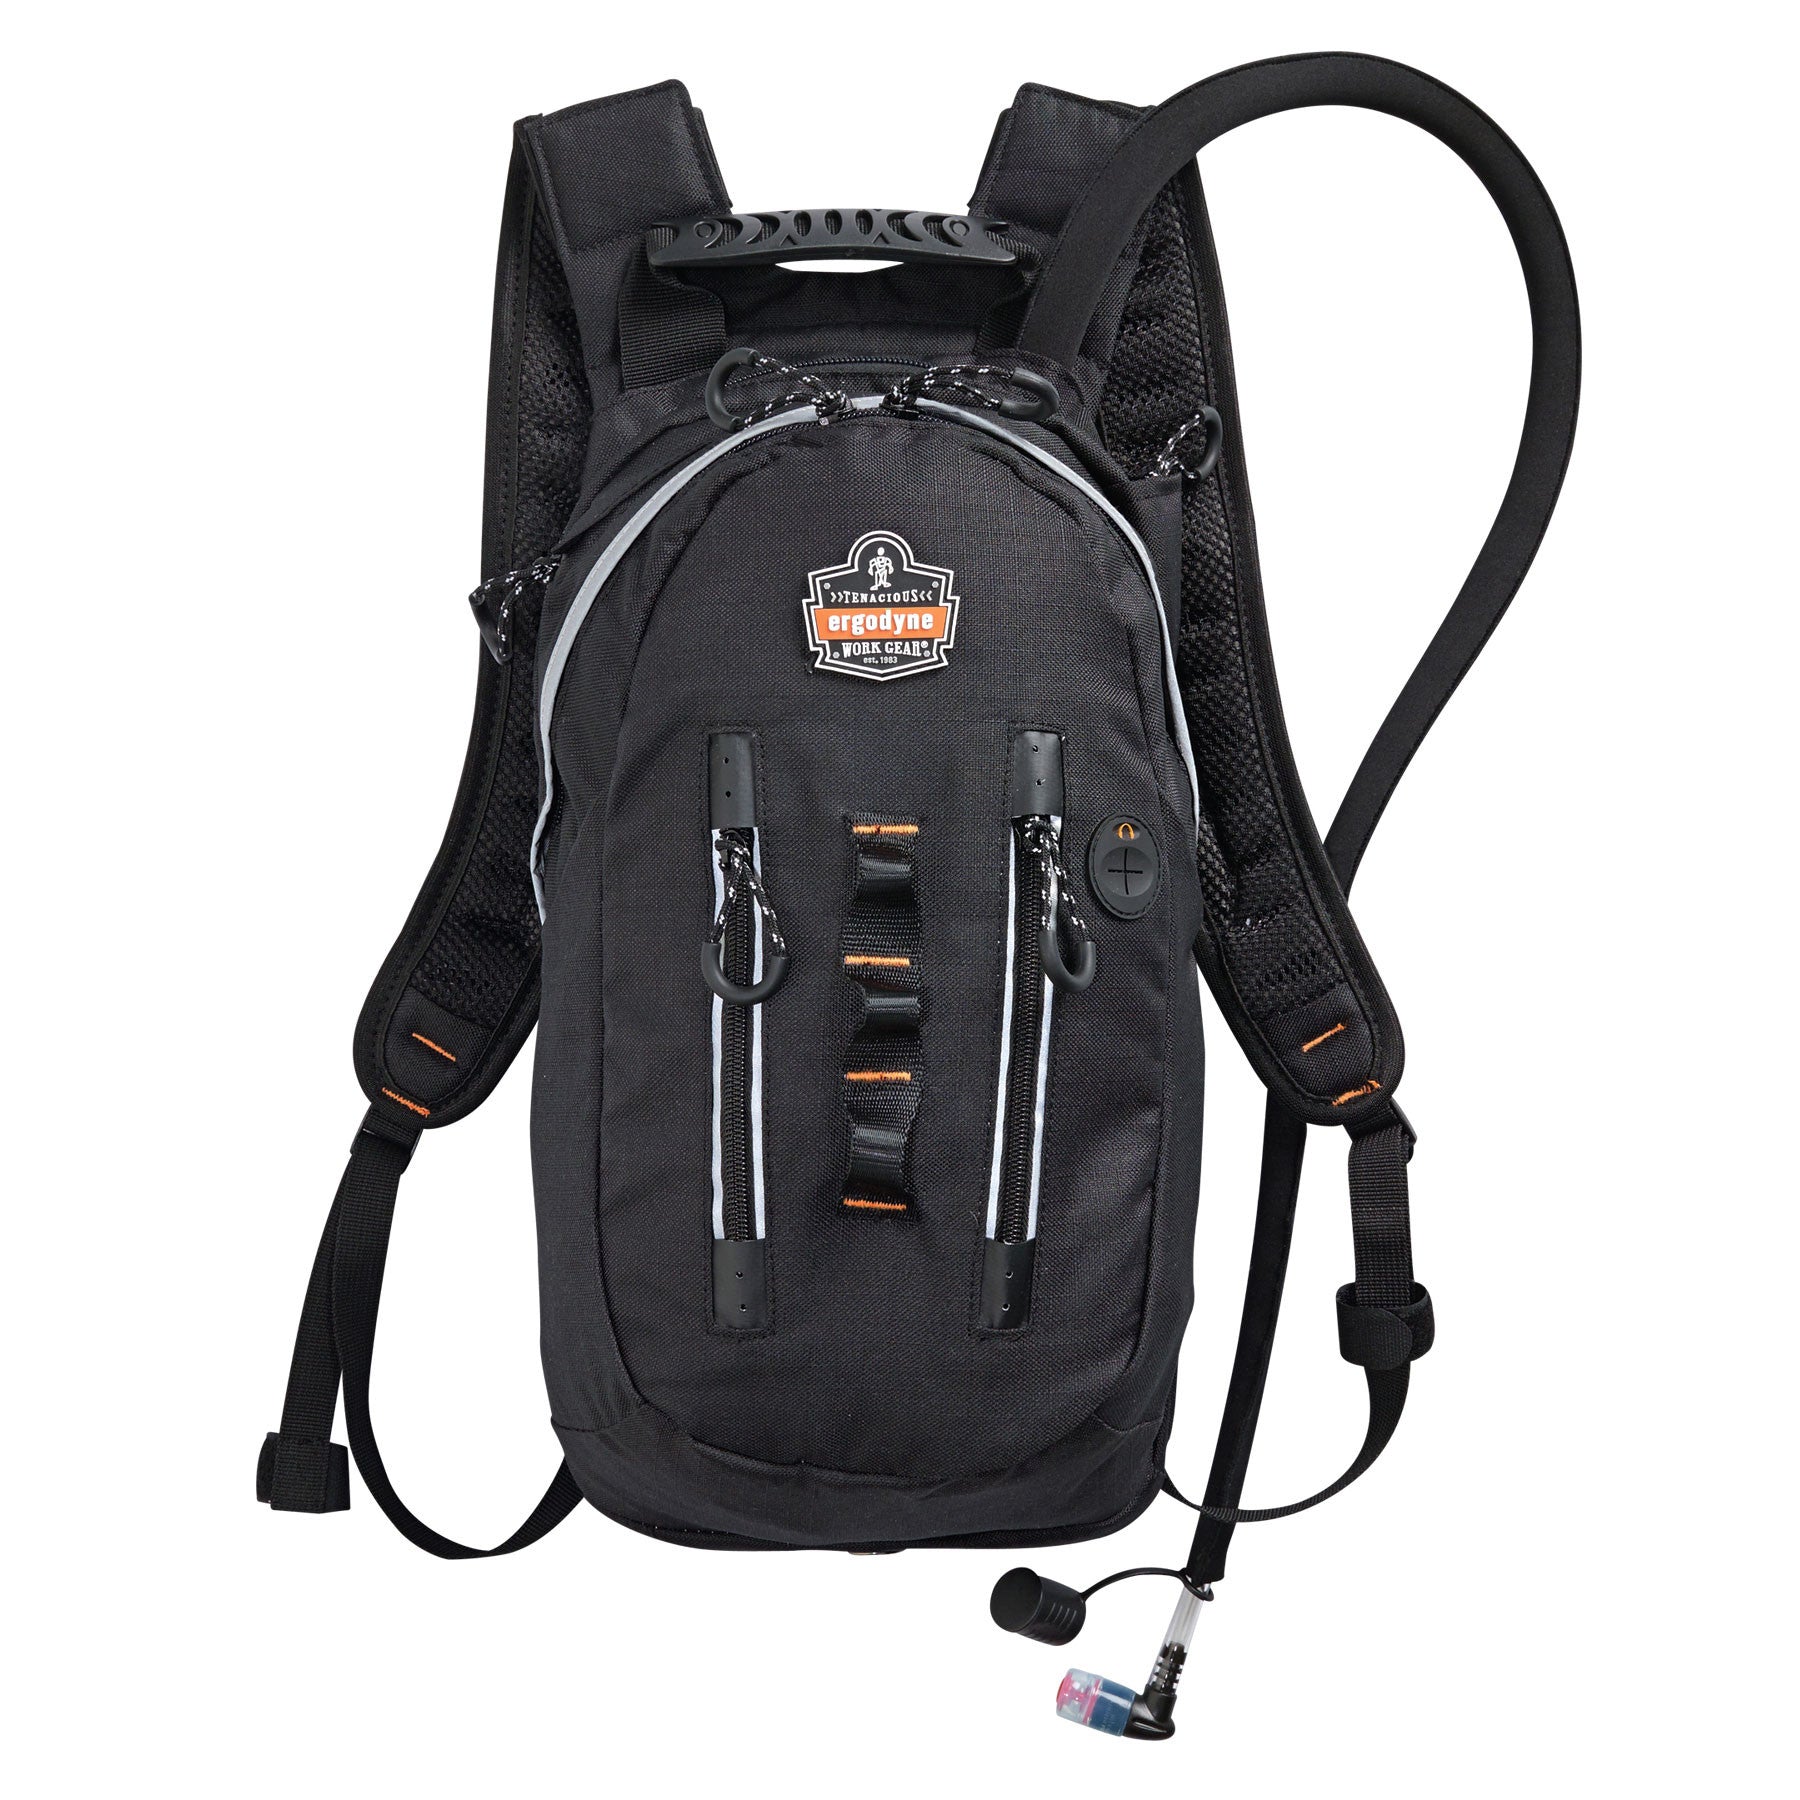 Chill-Its 5157 Premium Cargo Hydration Pack-eSafety Supplies, Inc